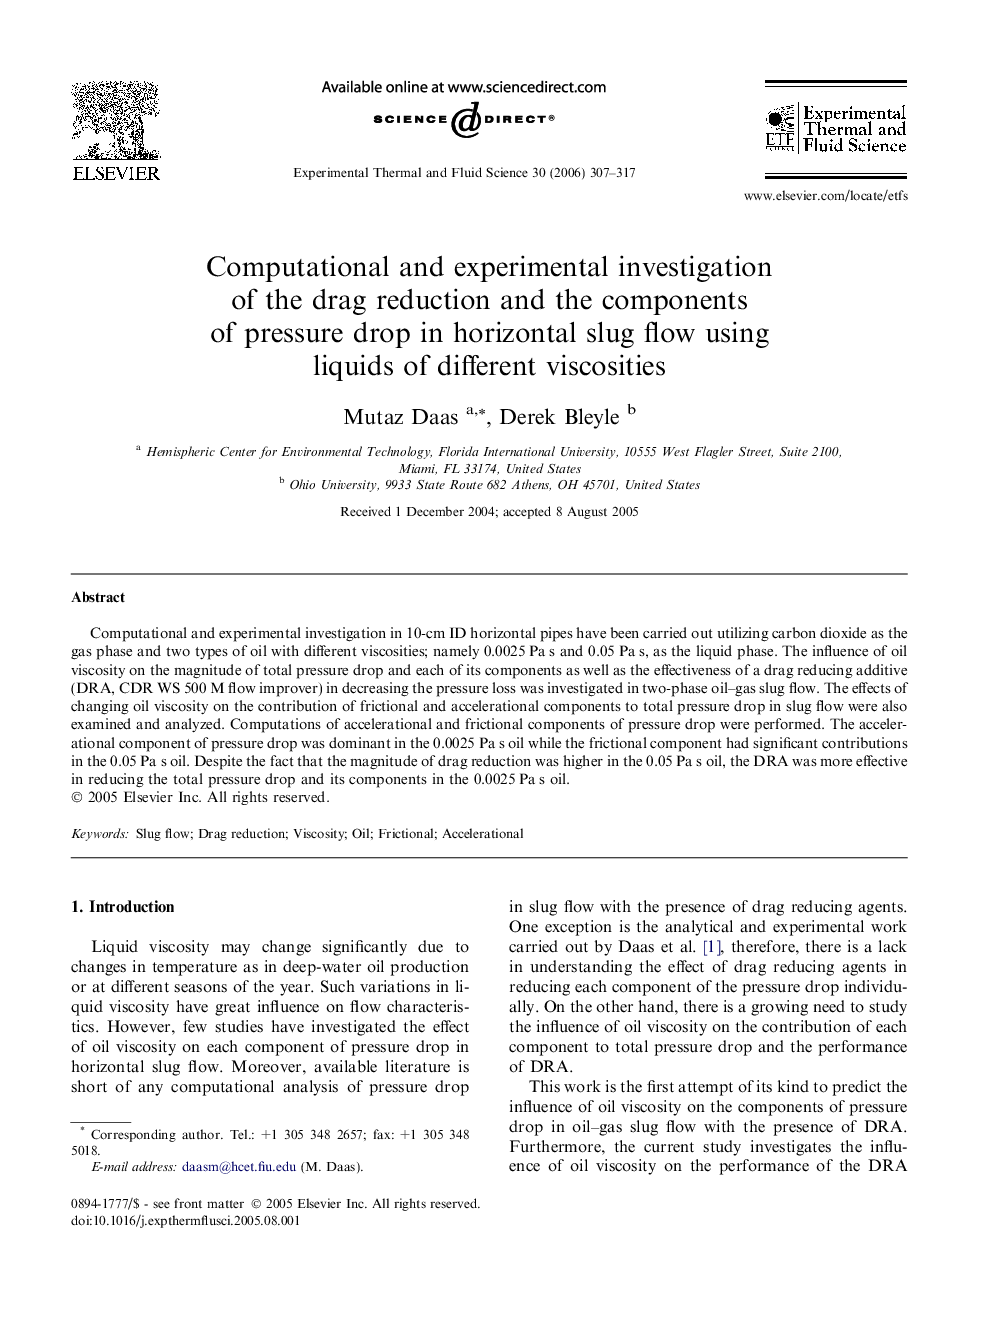 Computational and experimental investigation of the drag reduction and the components of pressure drop in horizontal slug flow using liquids of different viscosities